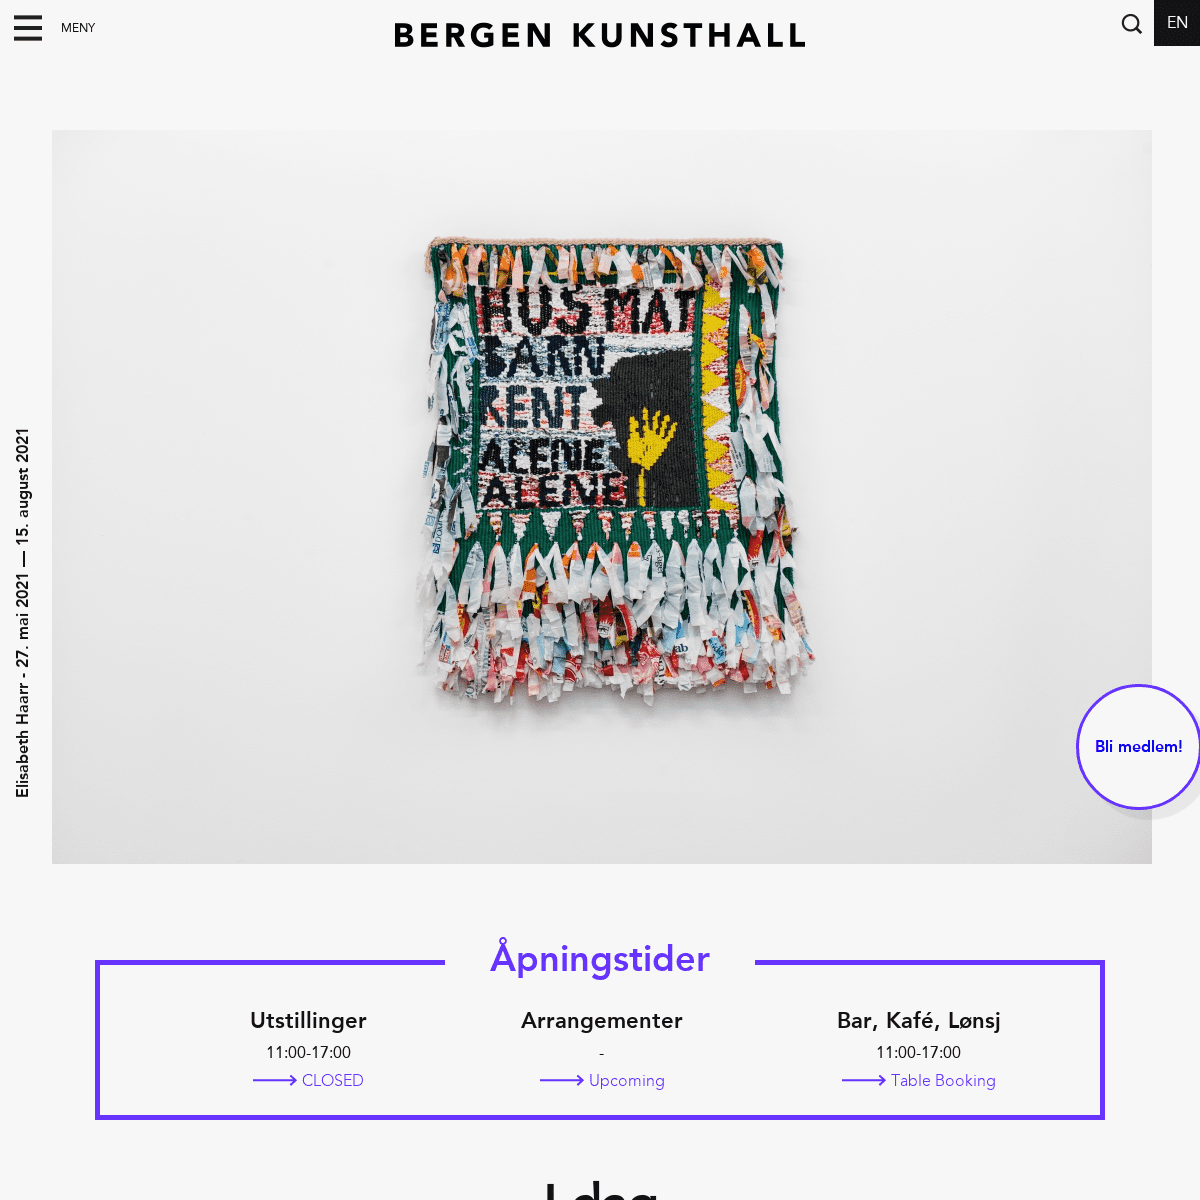 A complete backup of https://kunsthall.no